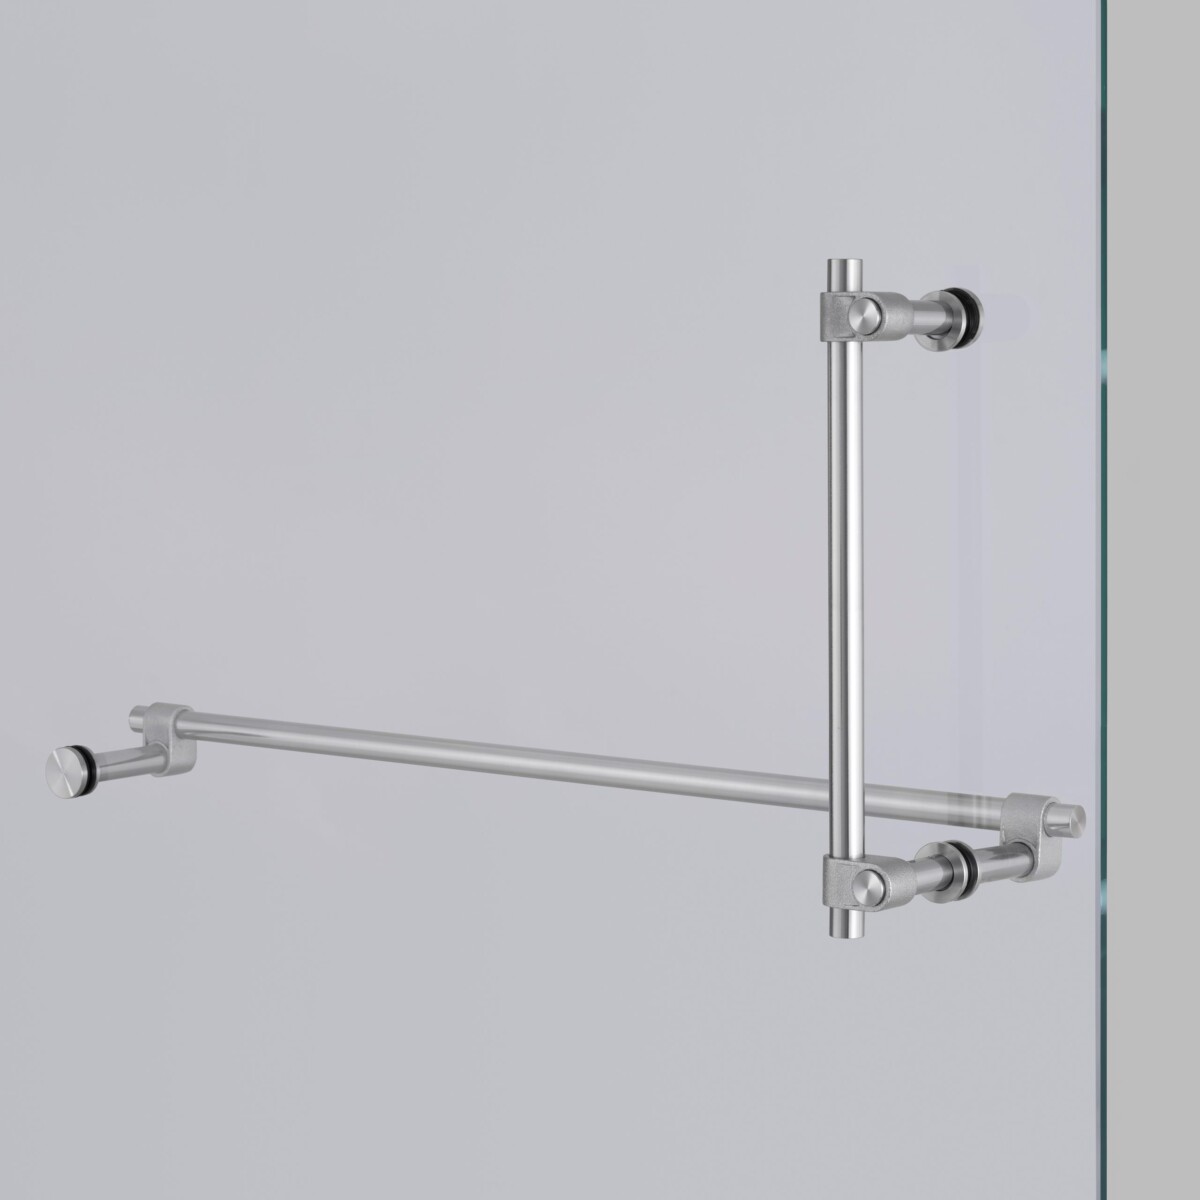 BP_Cast_Towel_Rail_and_Pull_Bar_Steel_A1_Web-scaled